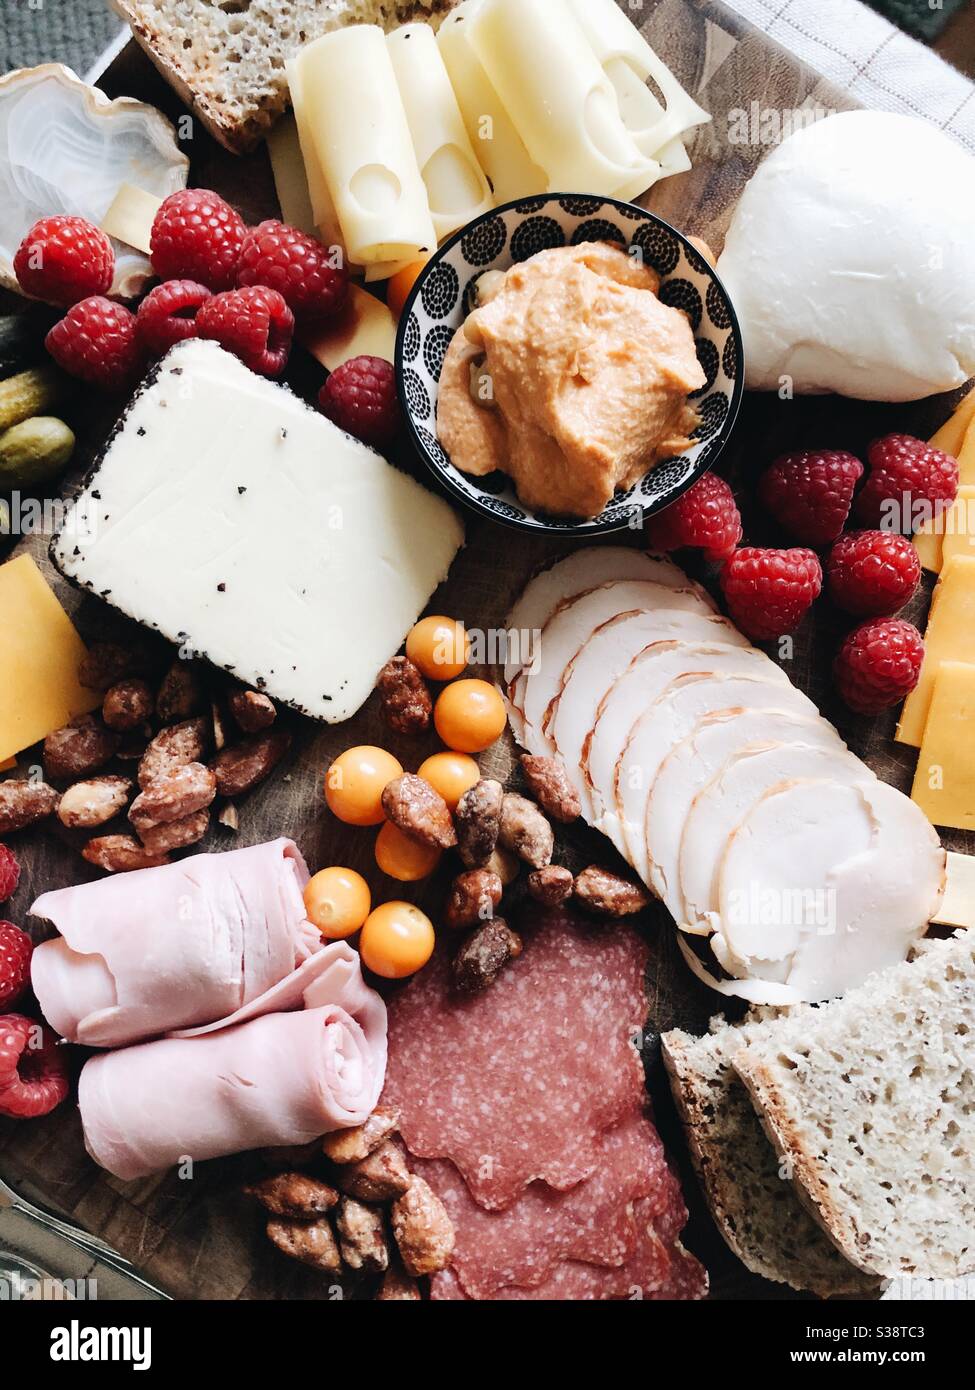 Meat, cheese, fruit and nut charcuterie board - a hot weather Italian meal when you don’t want to cook. Stock Photo